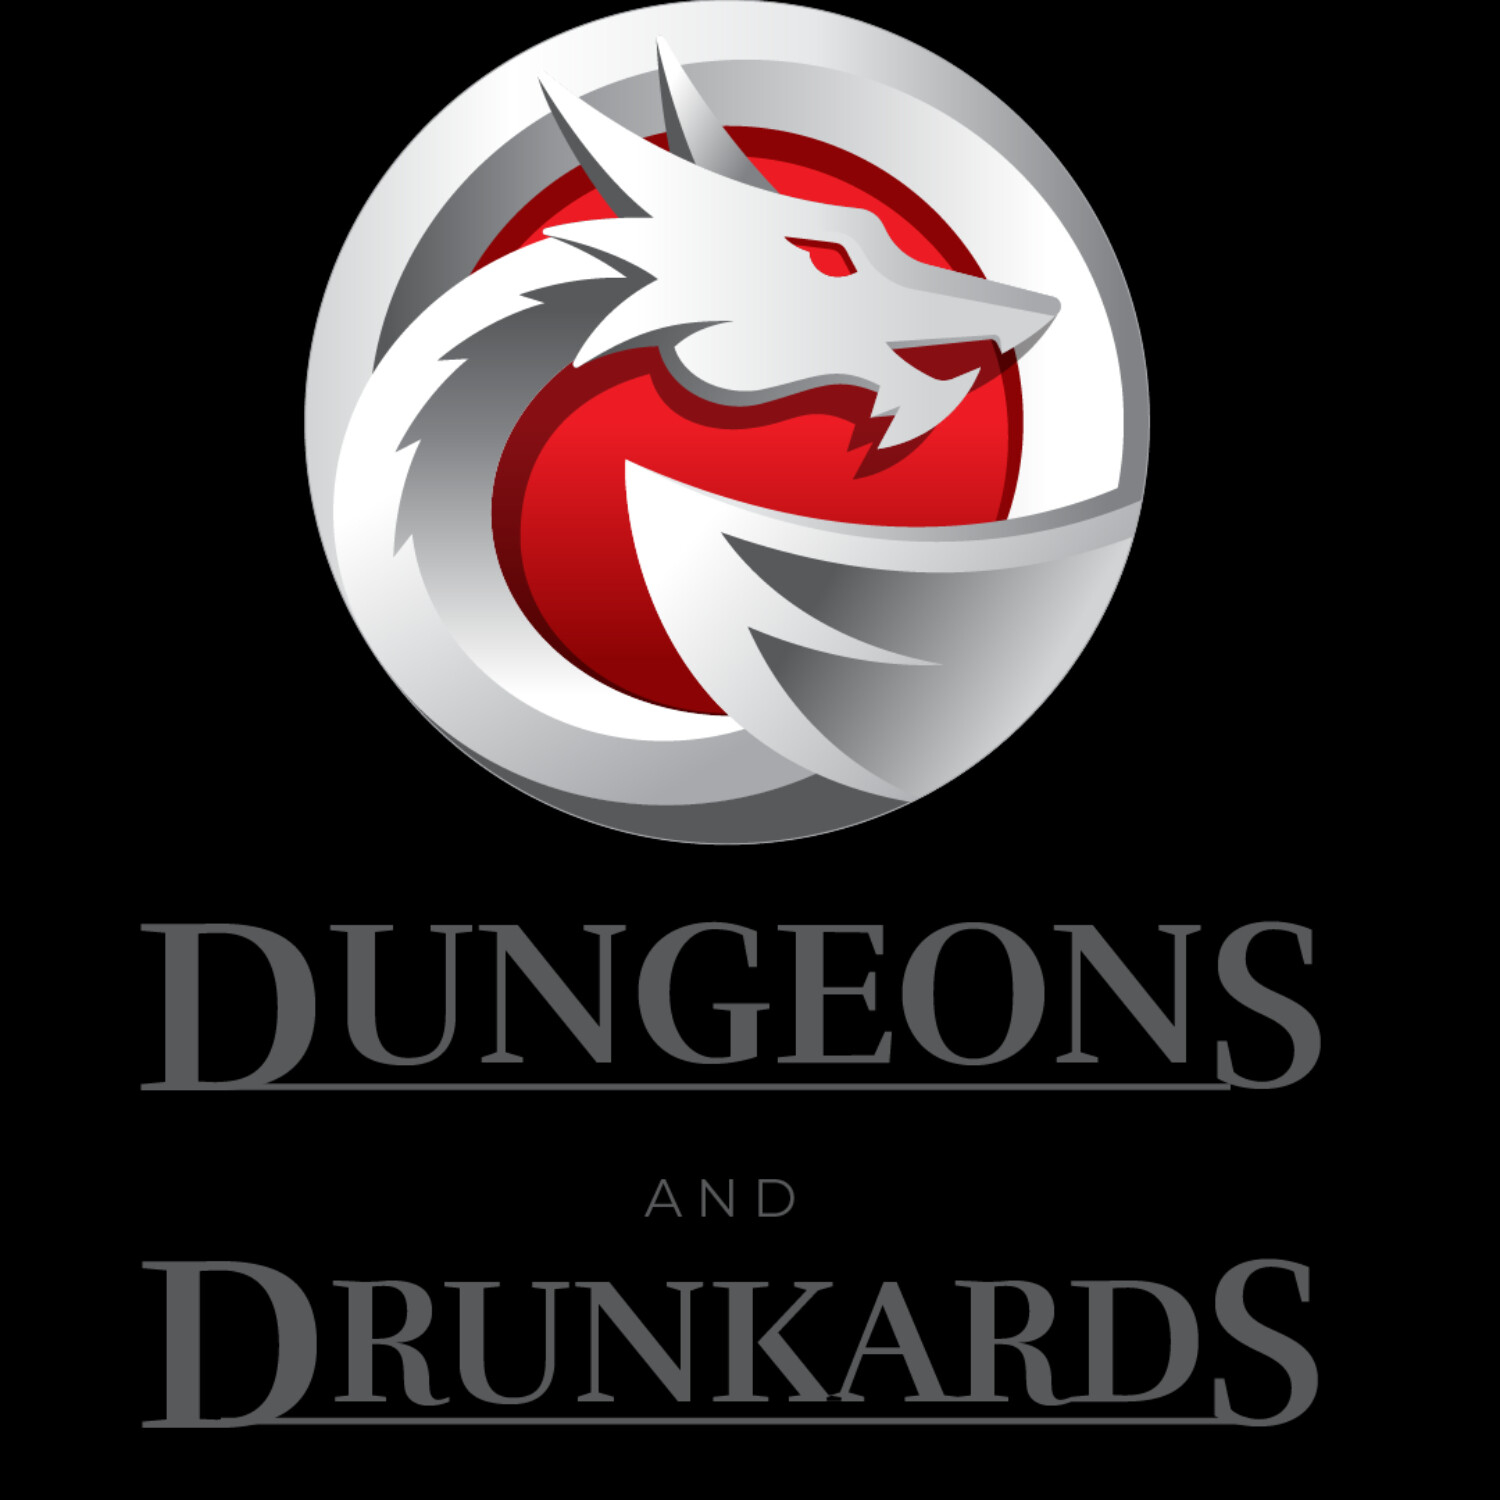 Dungeons and Drunkards